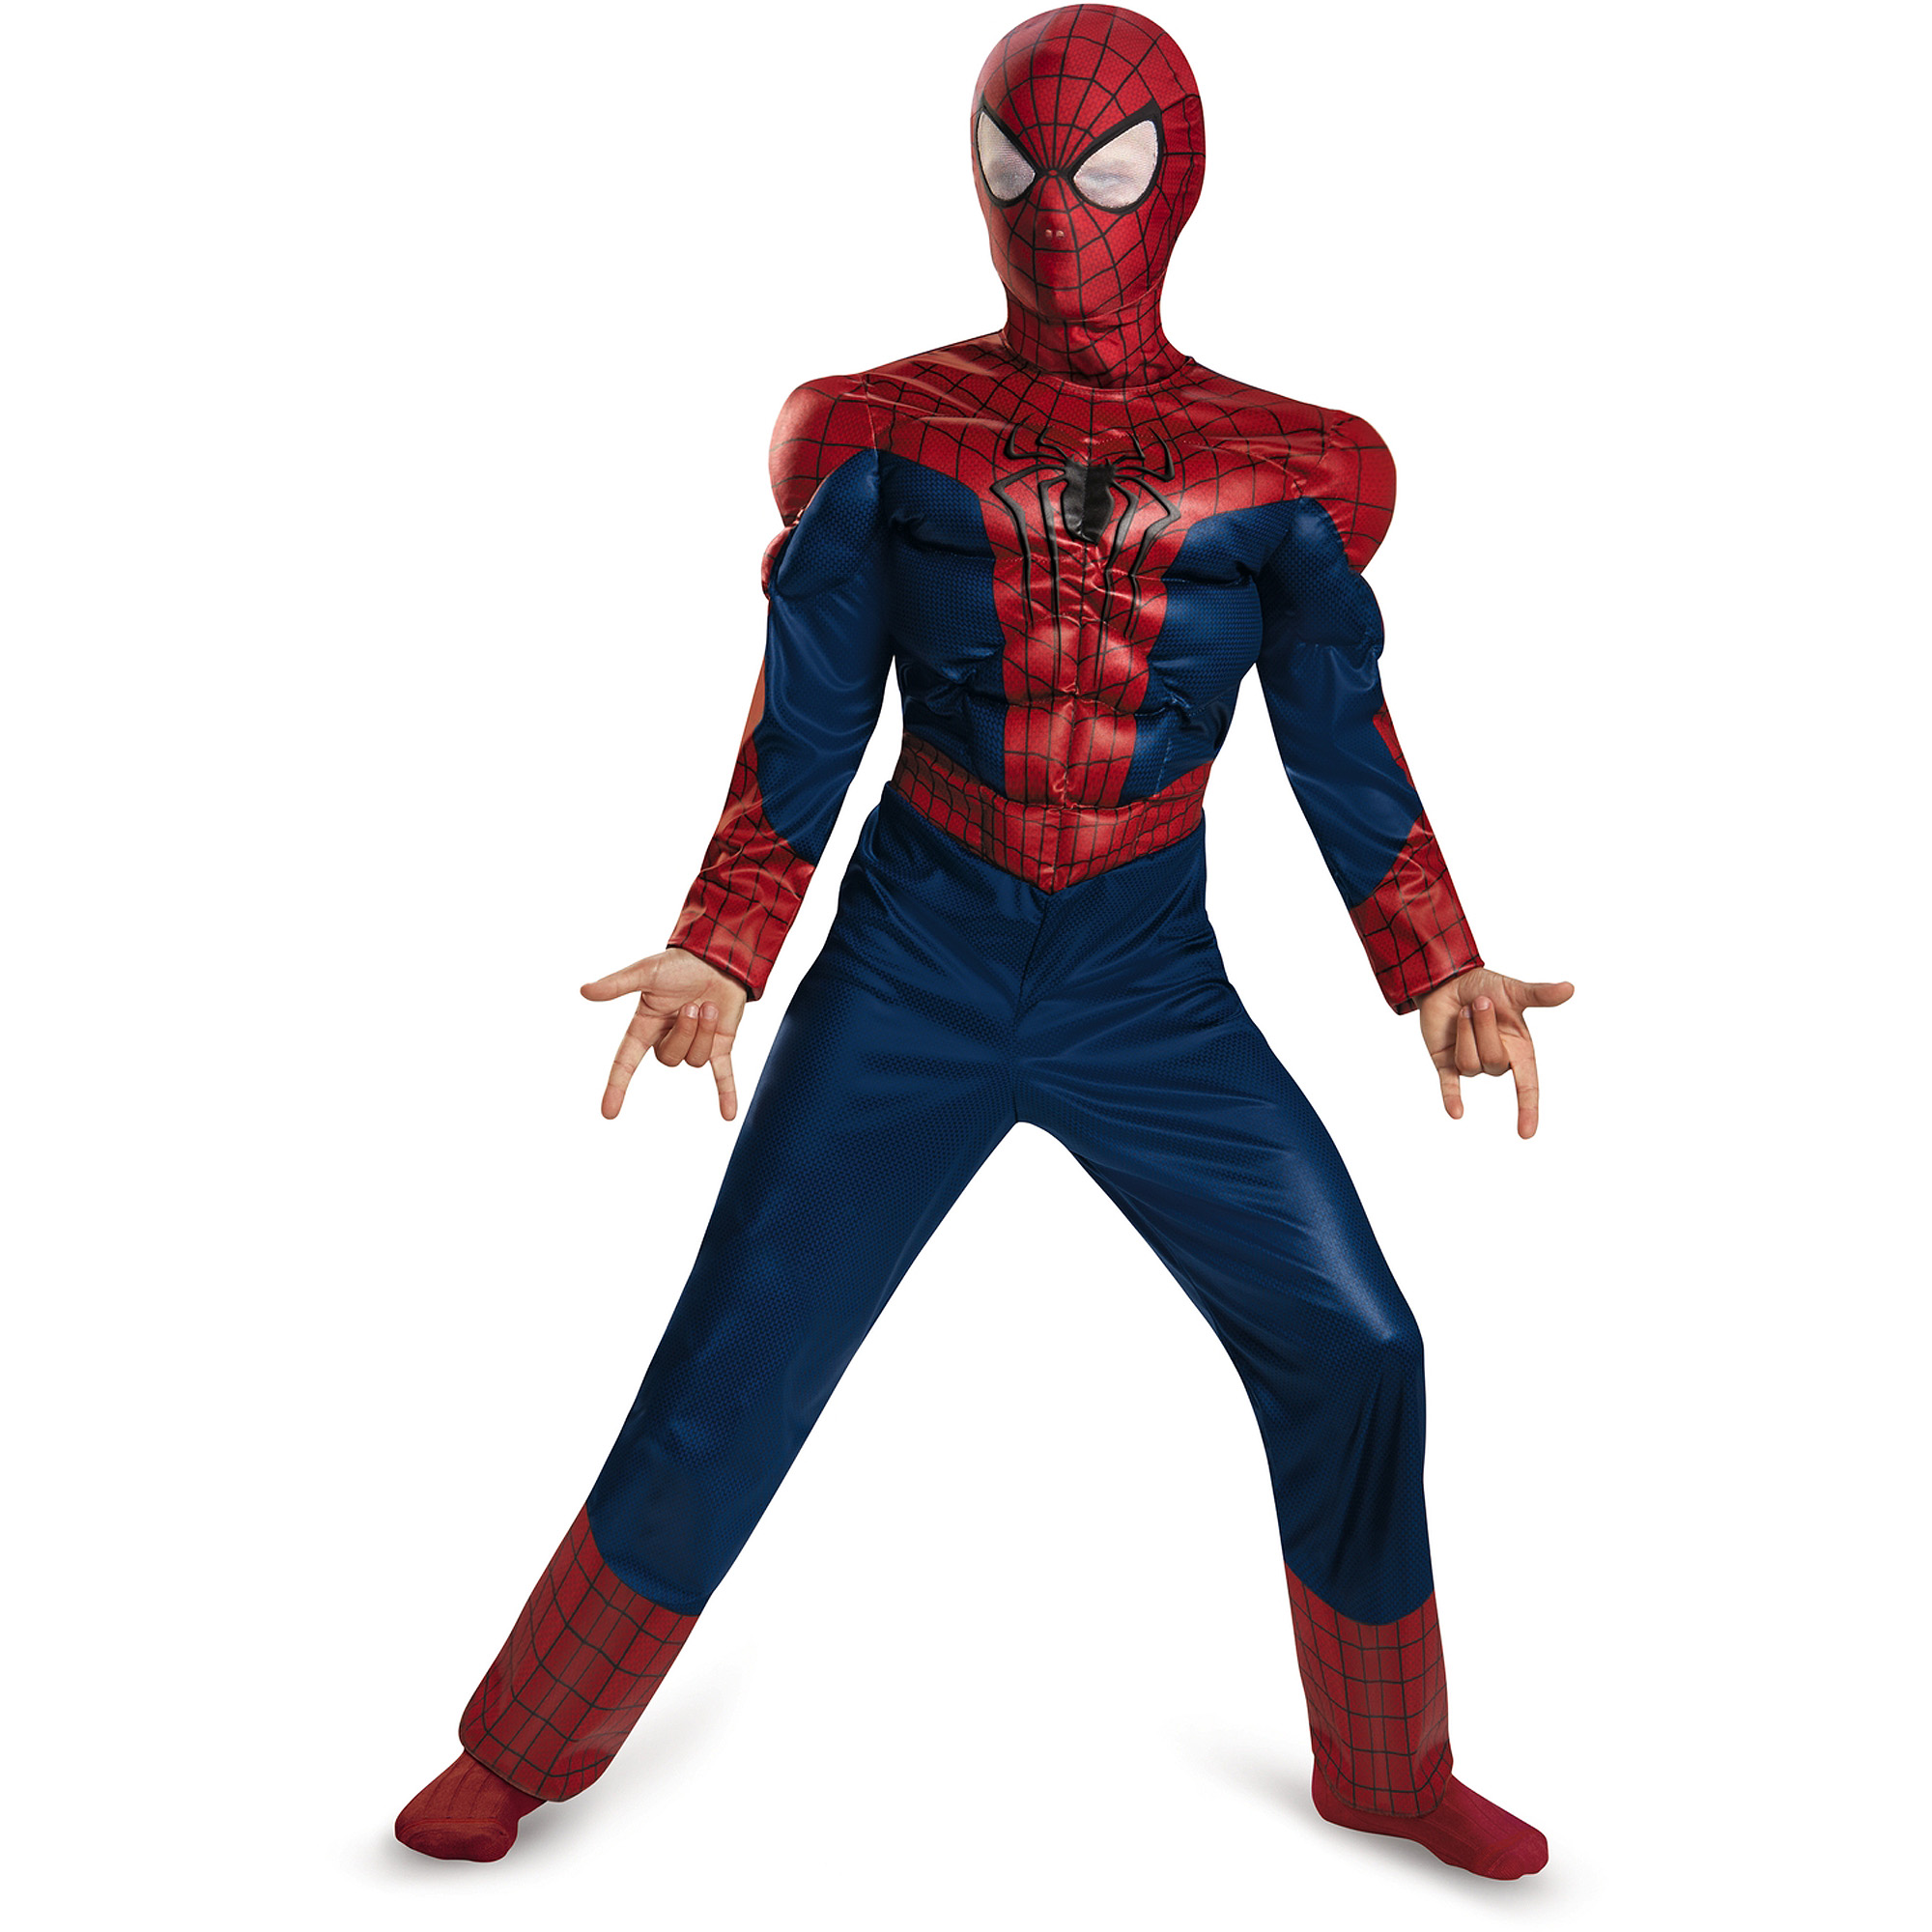 Spider-Man Muscle Child Halloween Costume - image 1 of 2